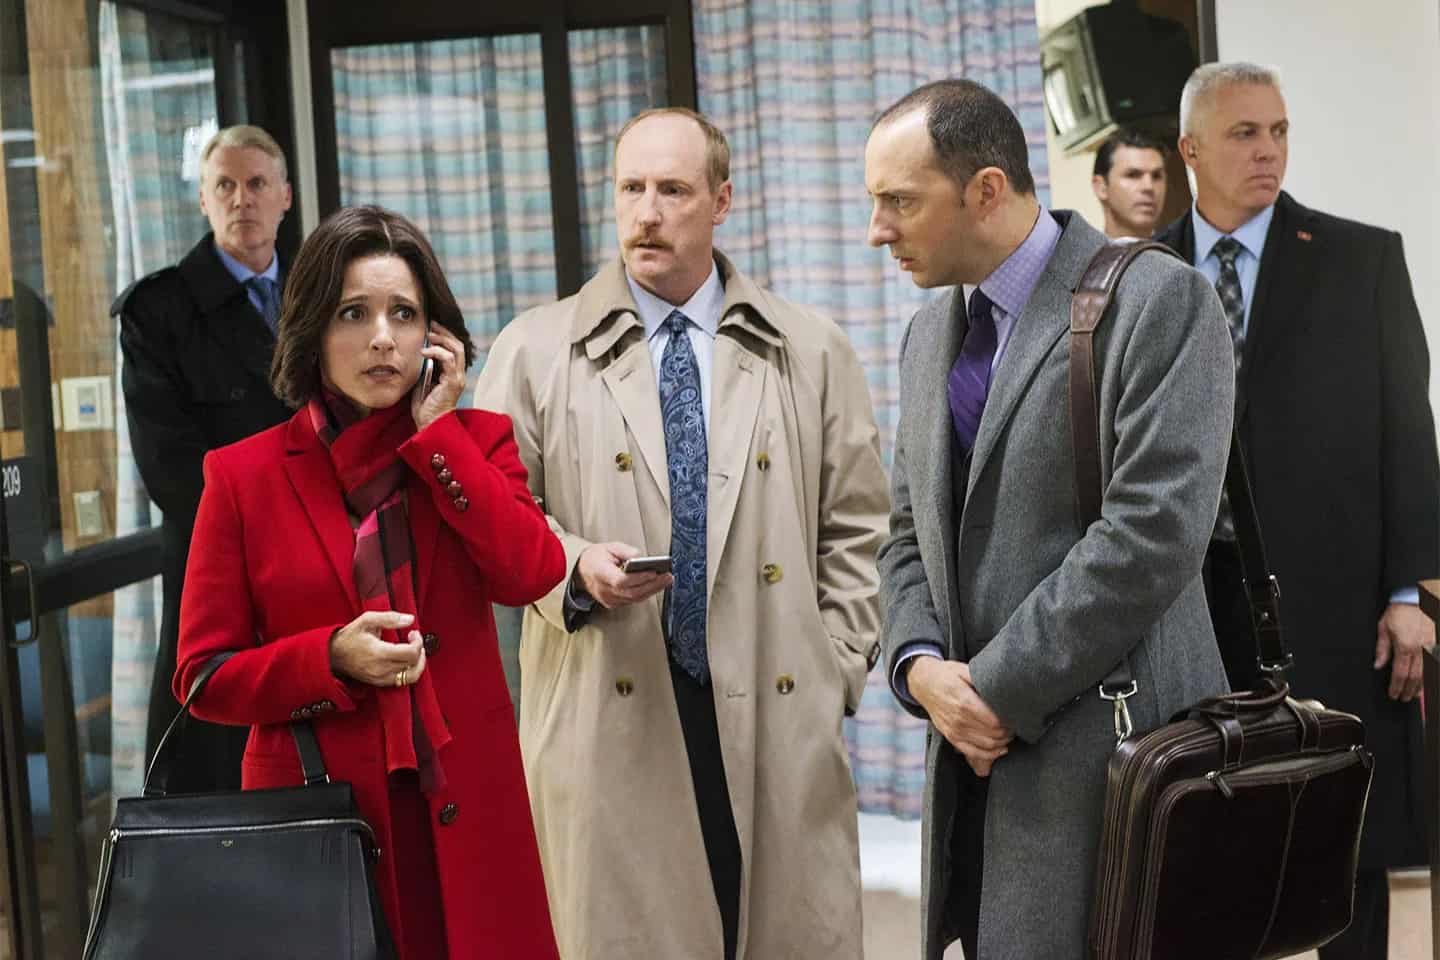 A Cut from the show, Veep